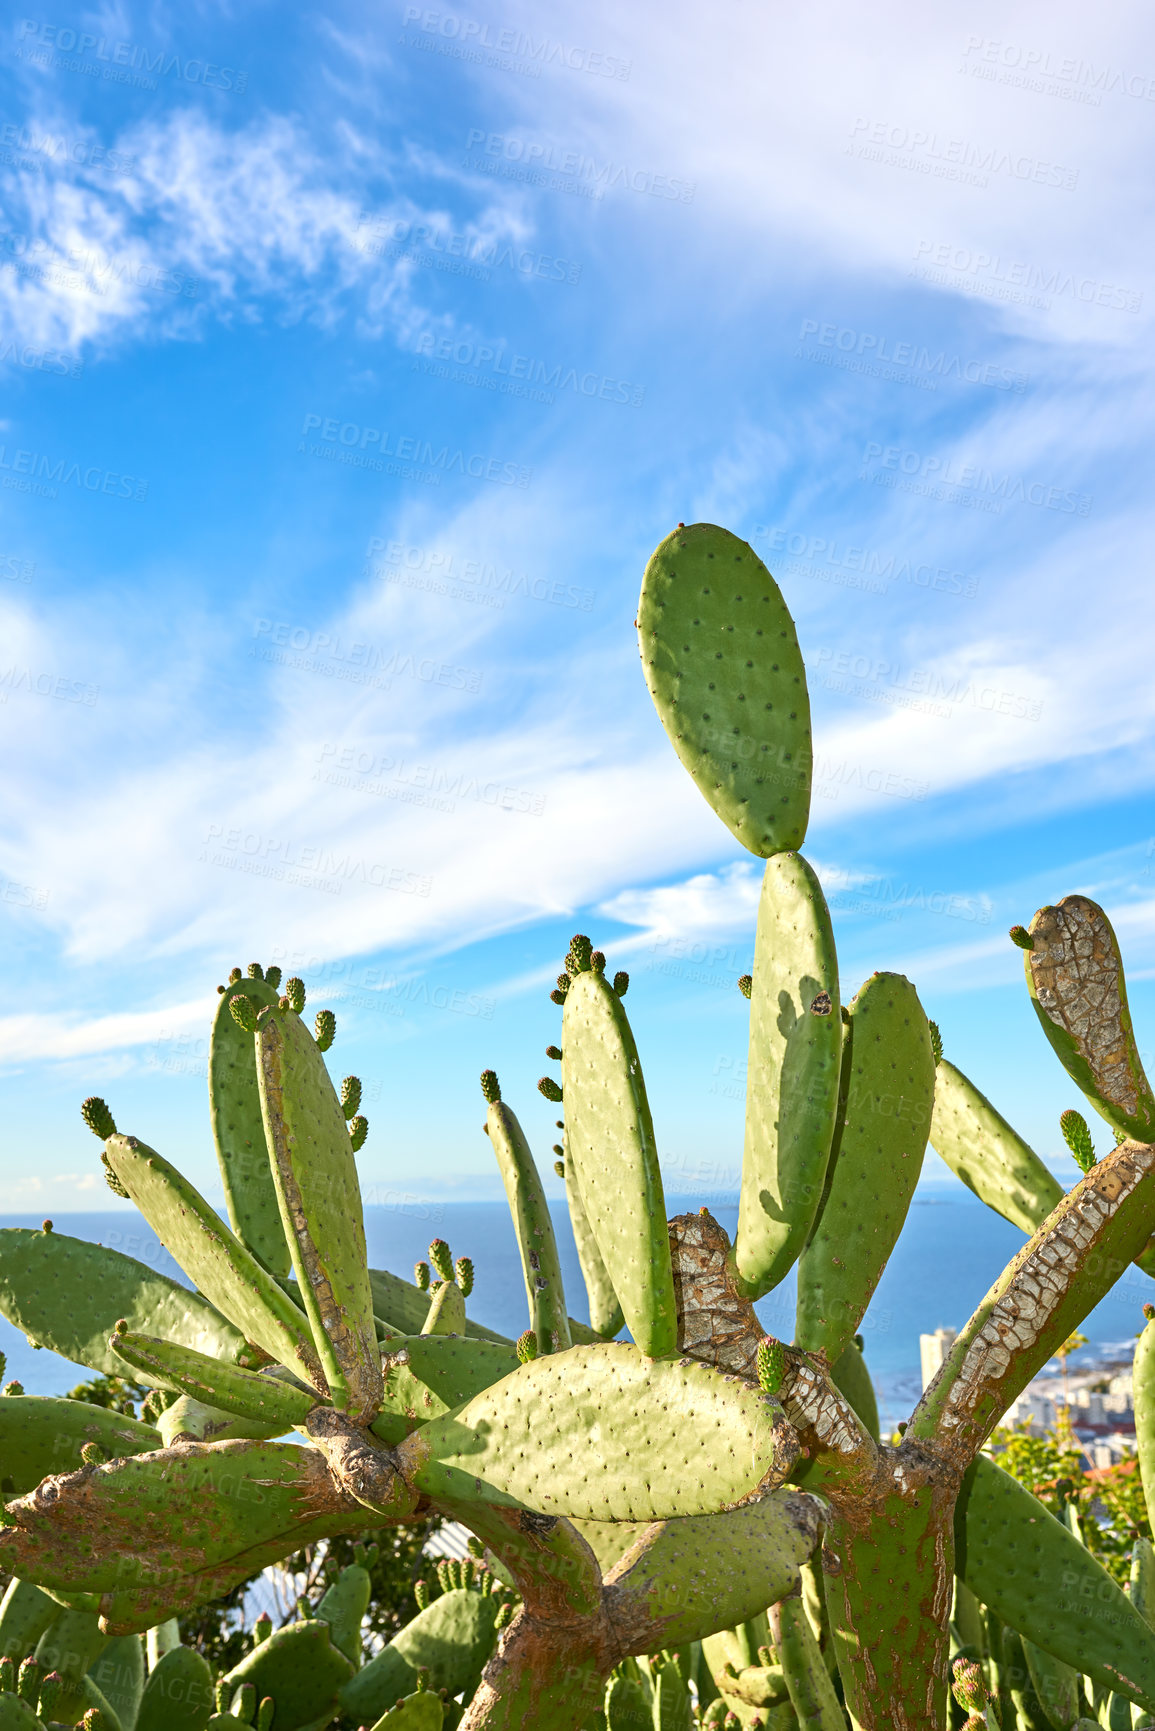 Buy stock photo Green pickly pear cactus growing against blue sky with clouds and copy space in Table Mountain National Park, South Africa. Vibrant opuntia succulent trees, bushes in remote landscape area in summer